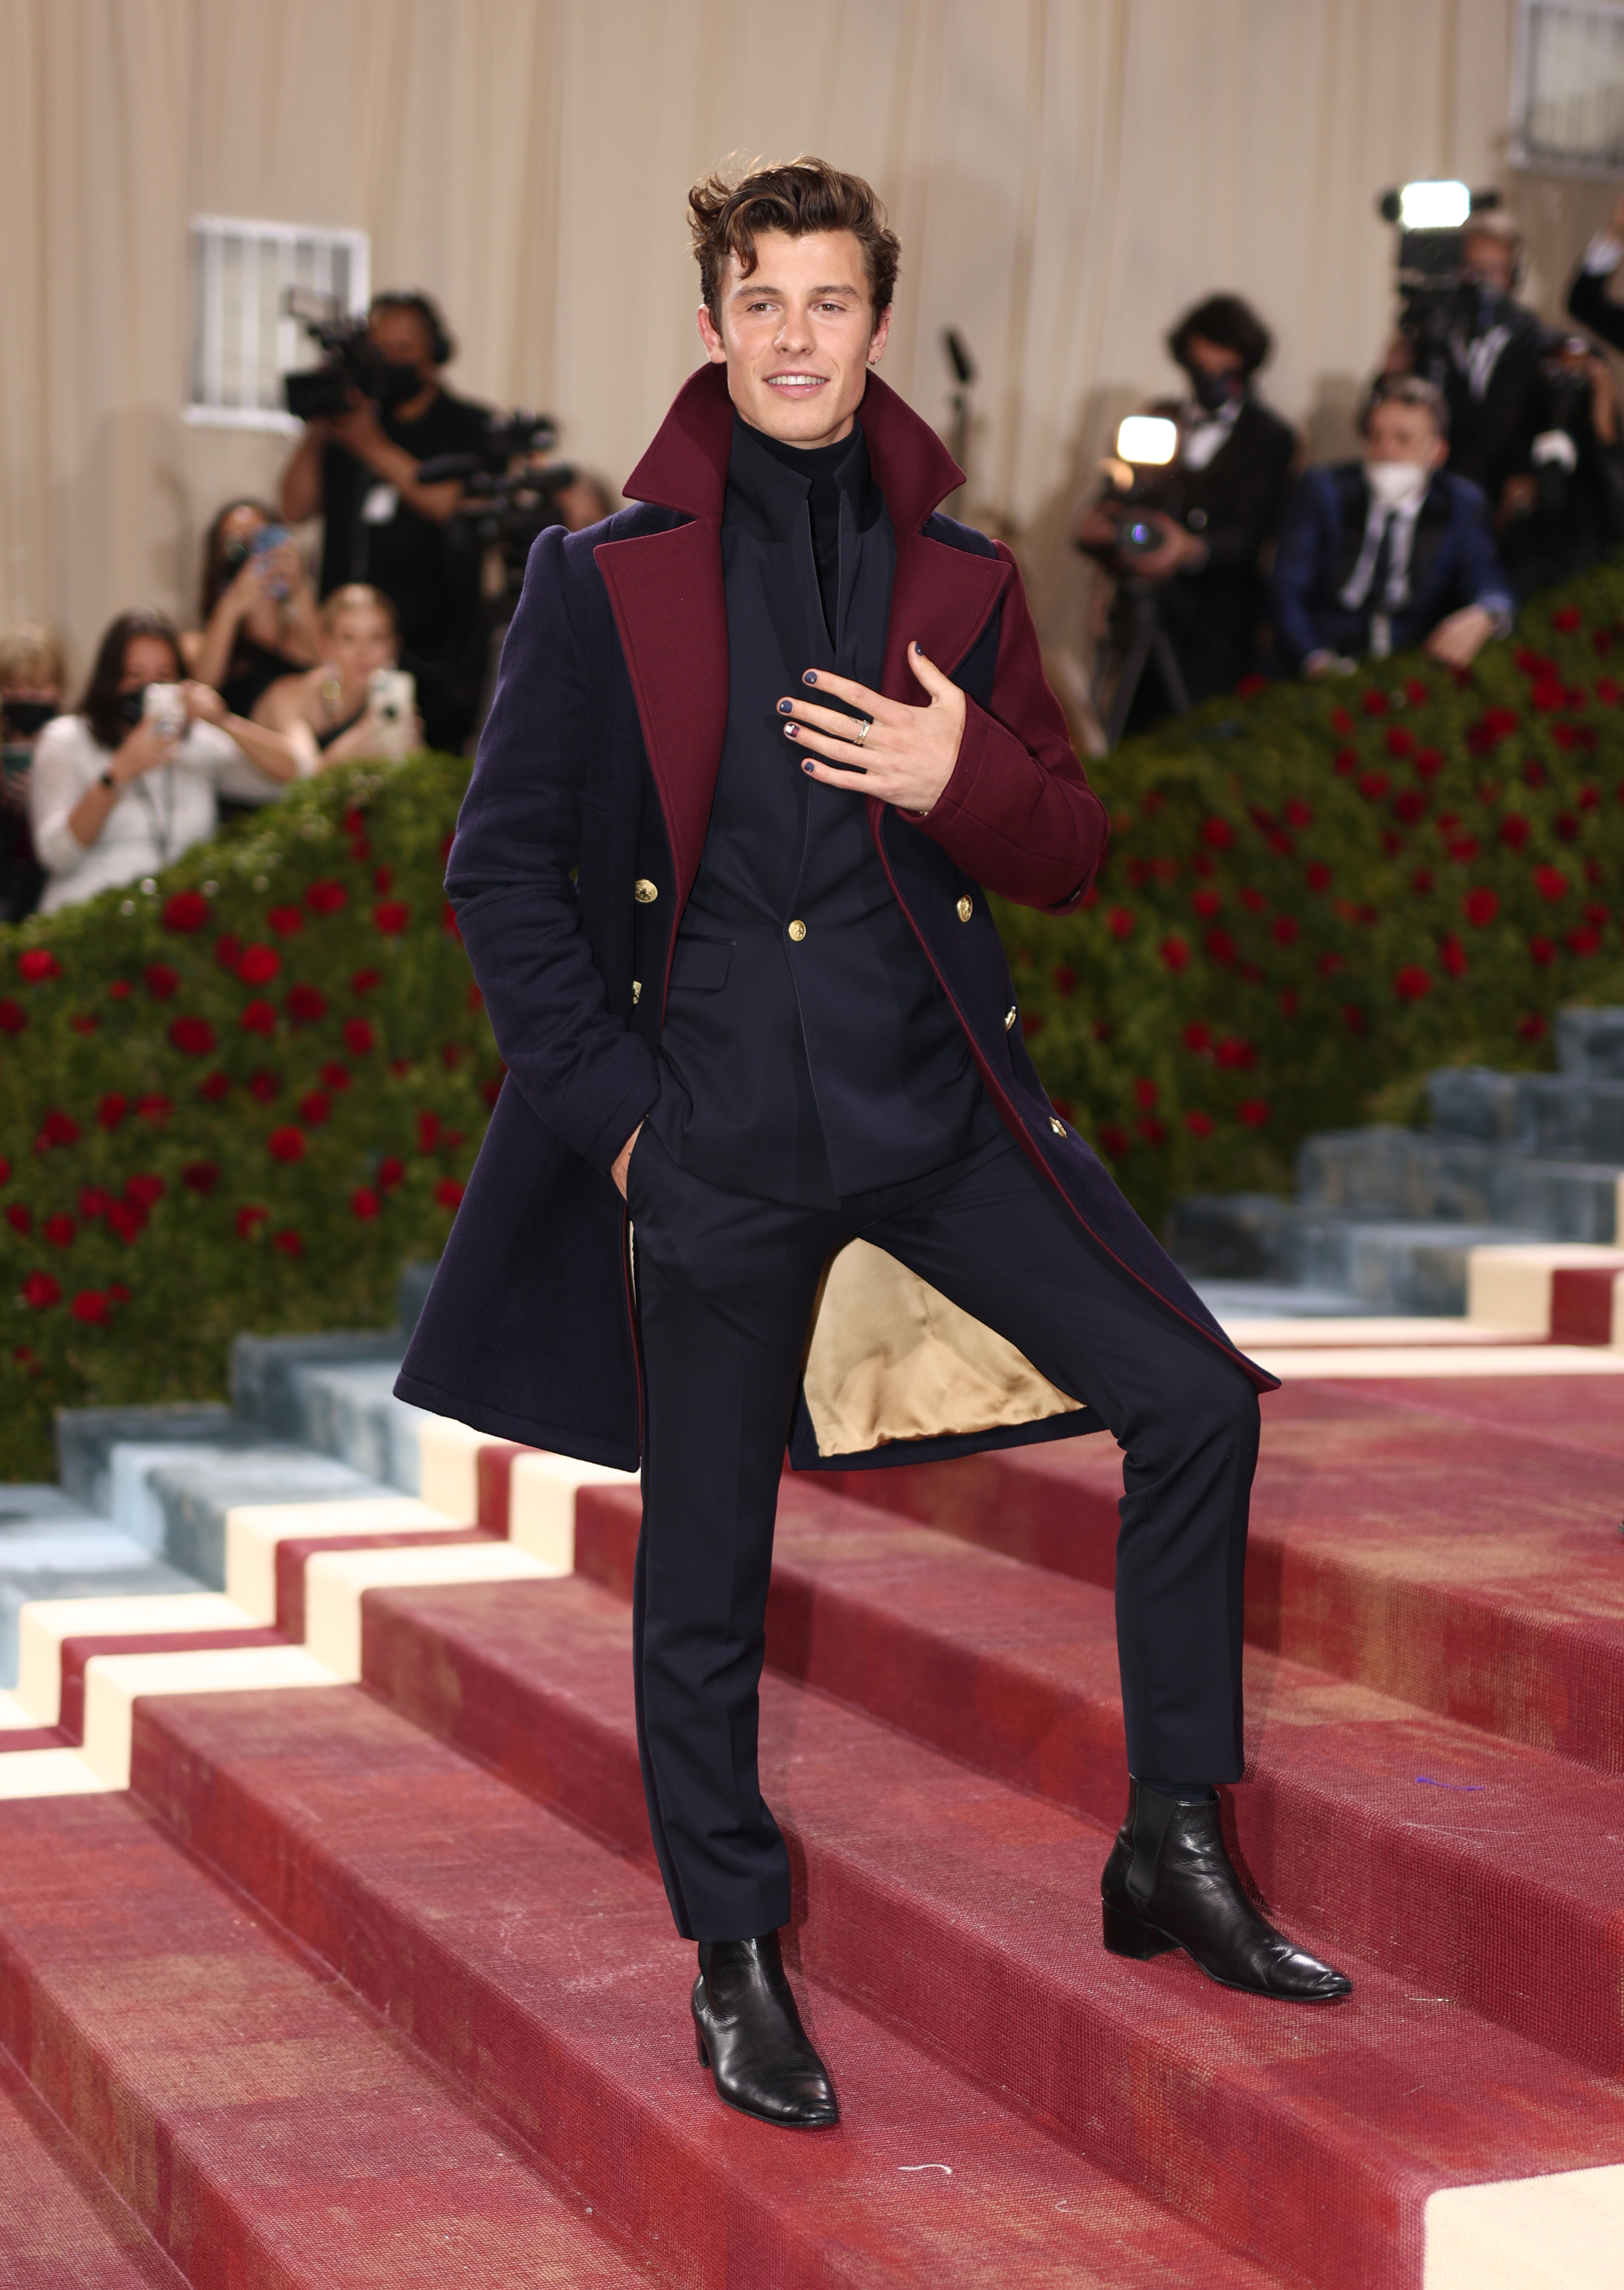 Man on red carpet posing in a layered navy outfit with a coat, scarf, and black boots